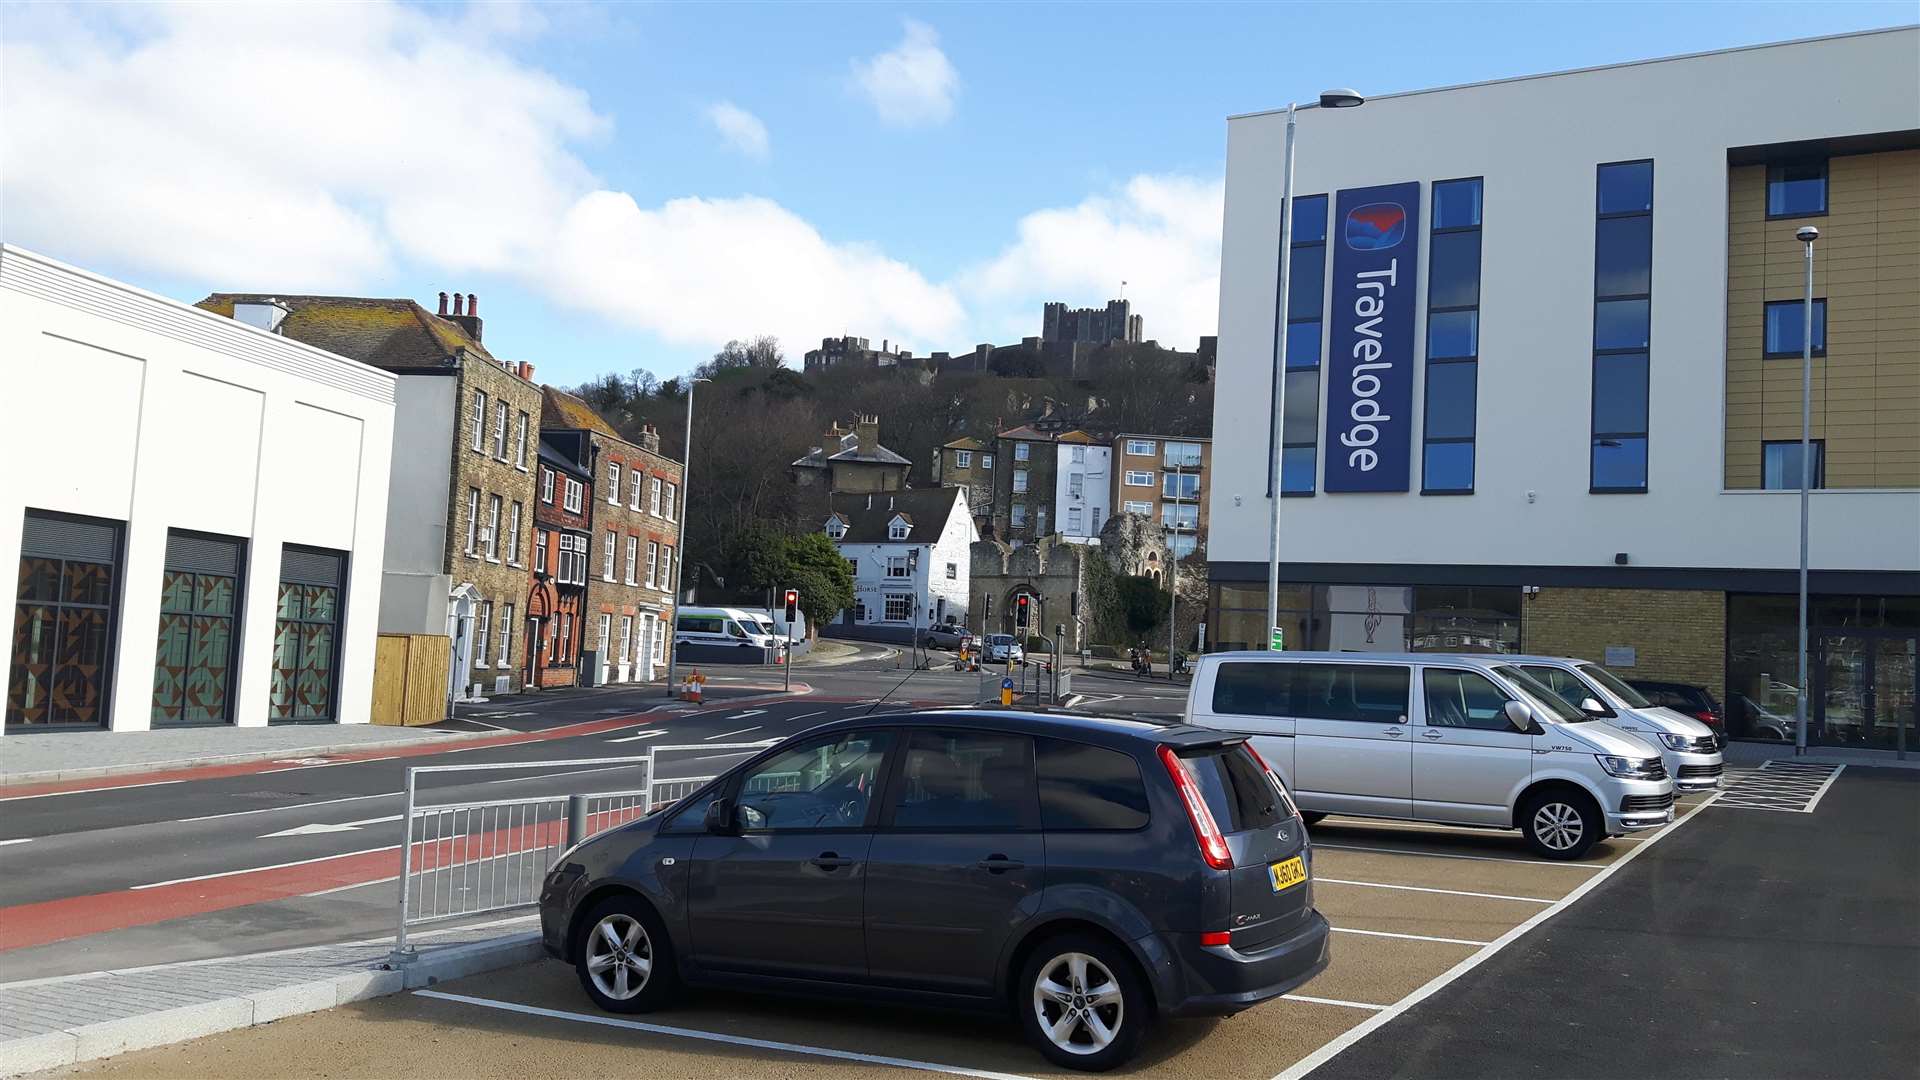 Old and new. The just-opened Travelodge with the castle and White Horse pub in the background. (1395960)